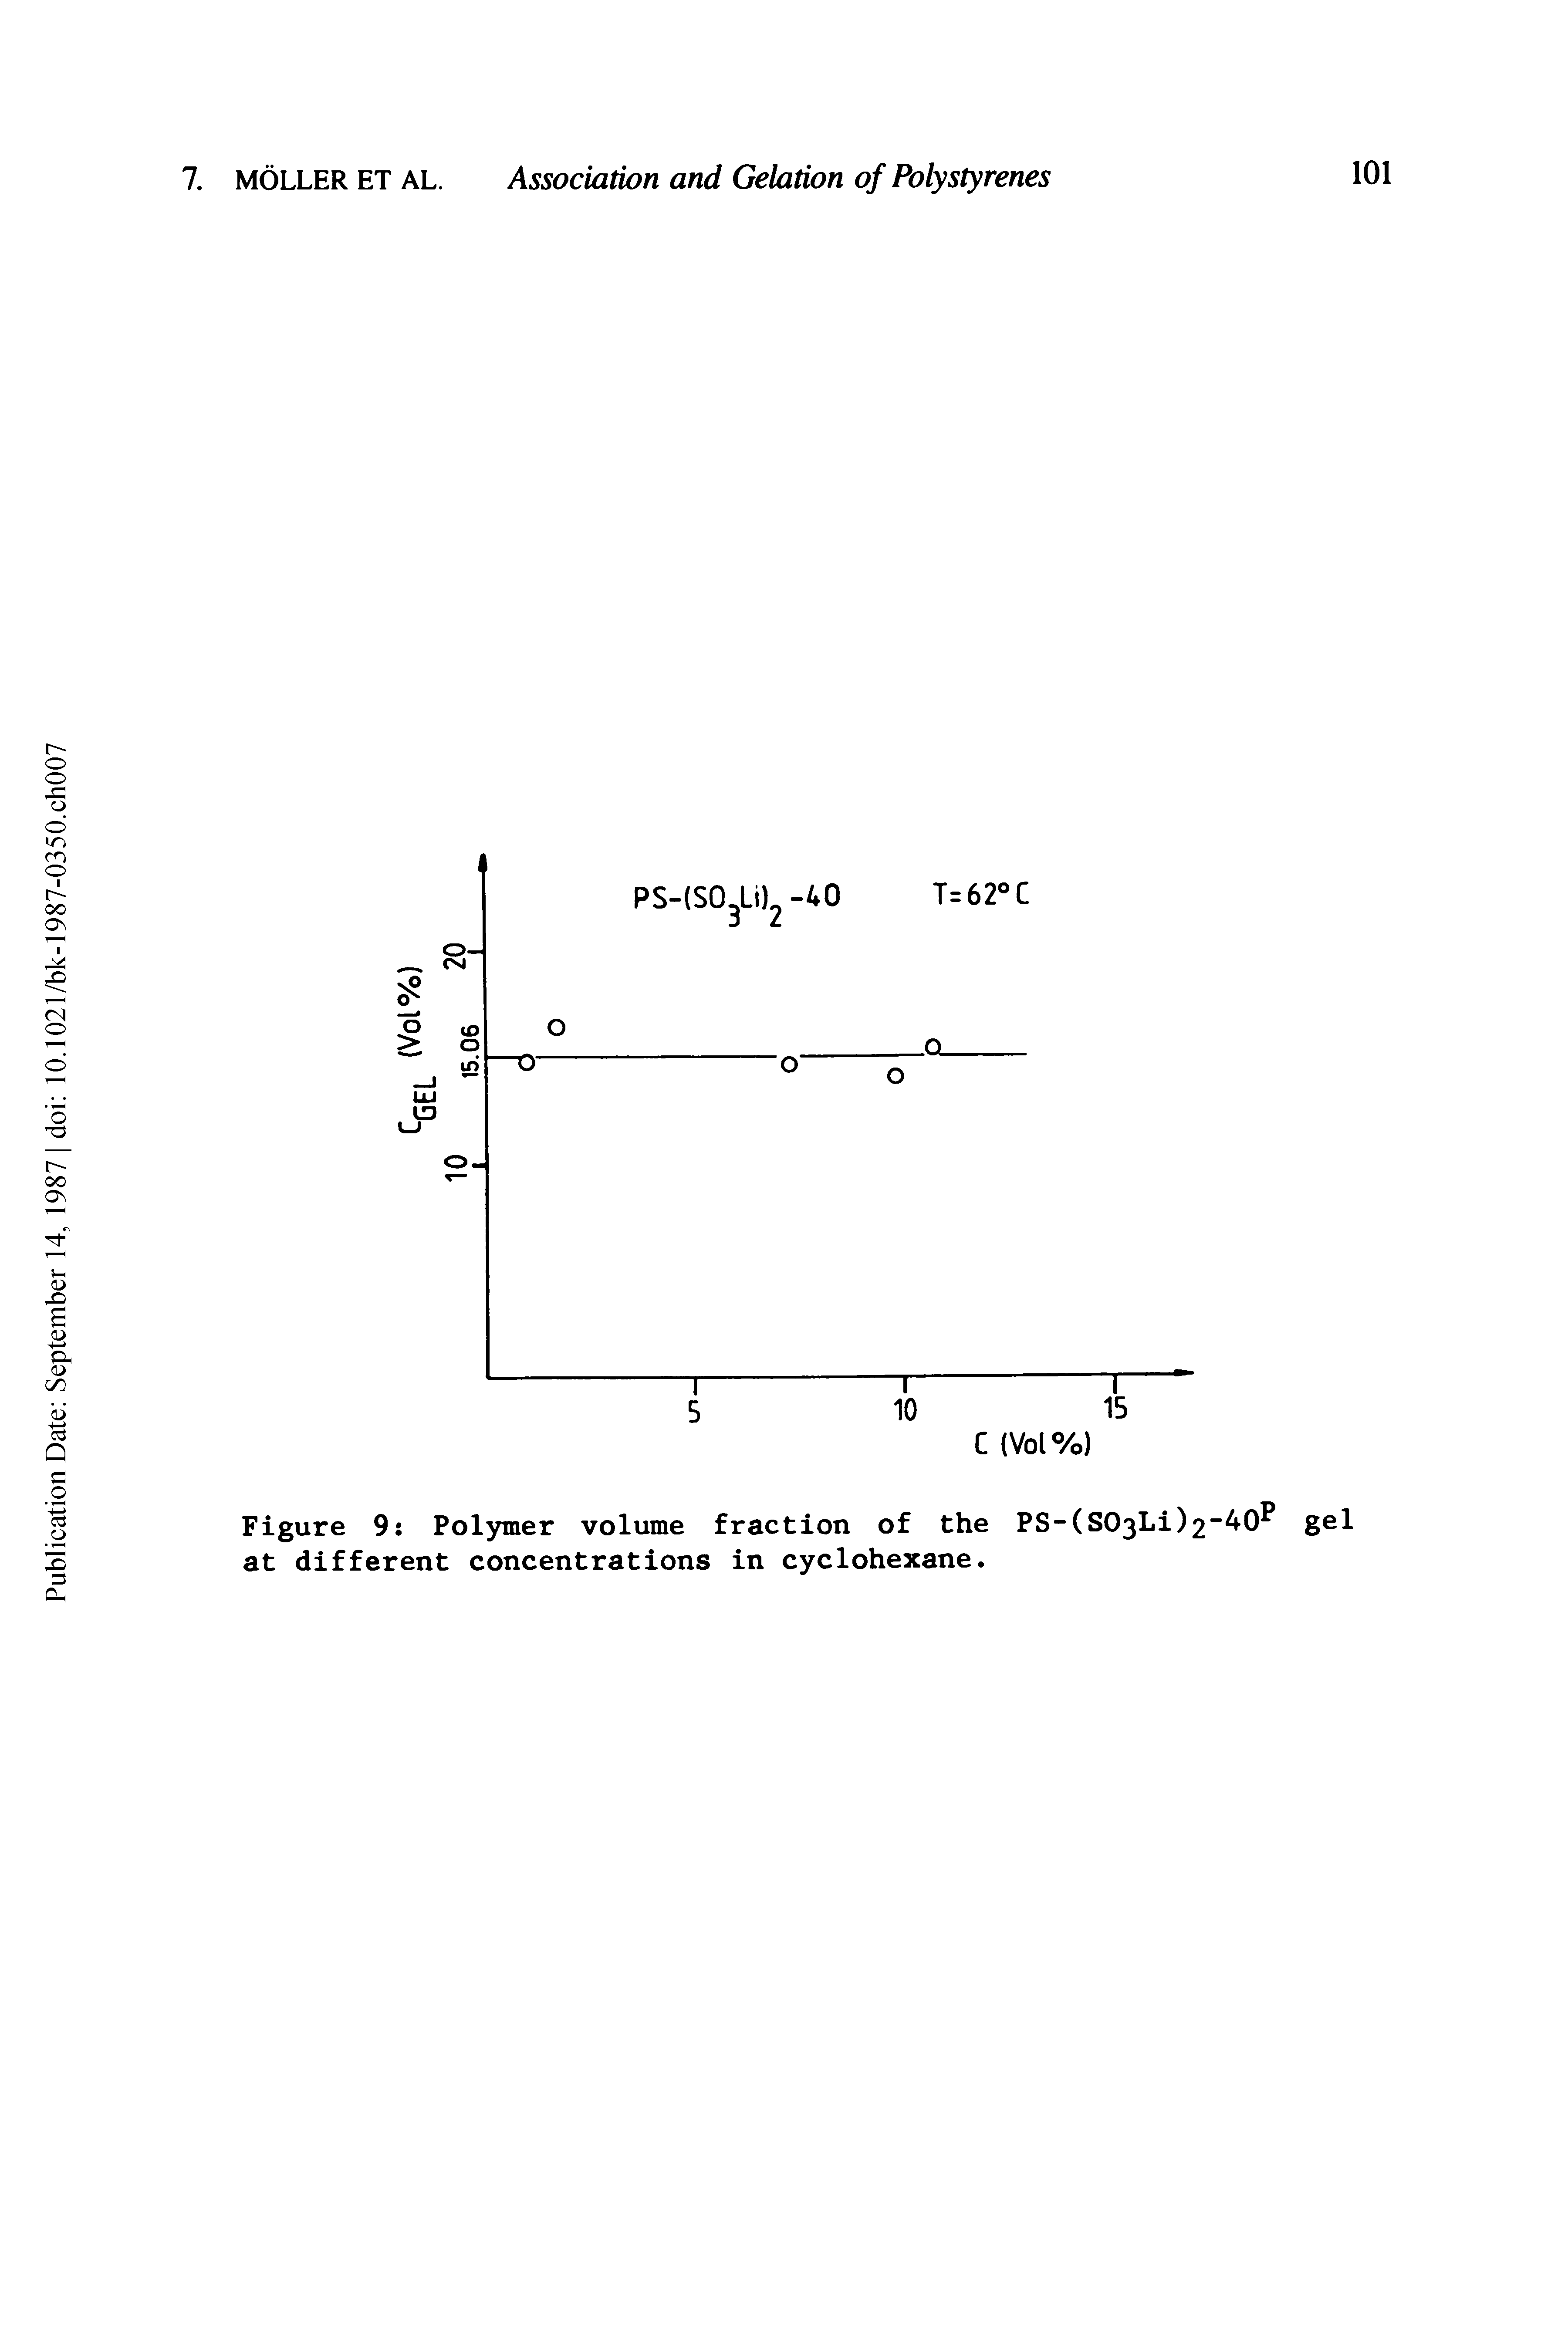 Figure 9 Polymer volume fraction of the PS-(S03Li)2"40 gel at different concentrations in cyclohexane.